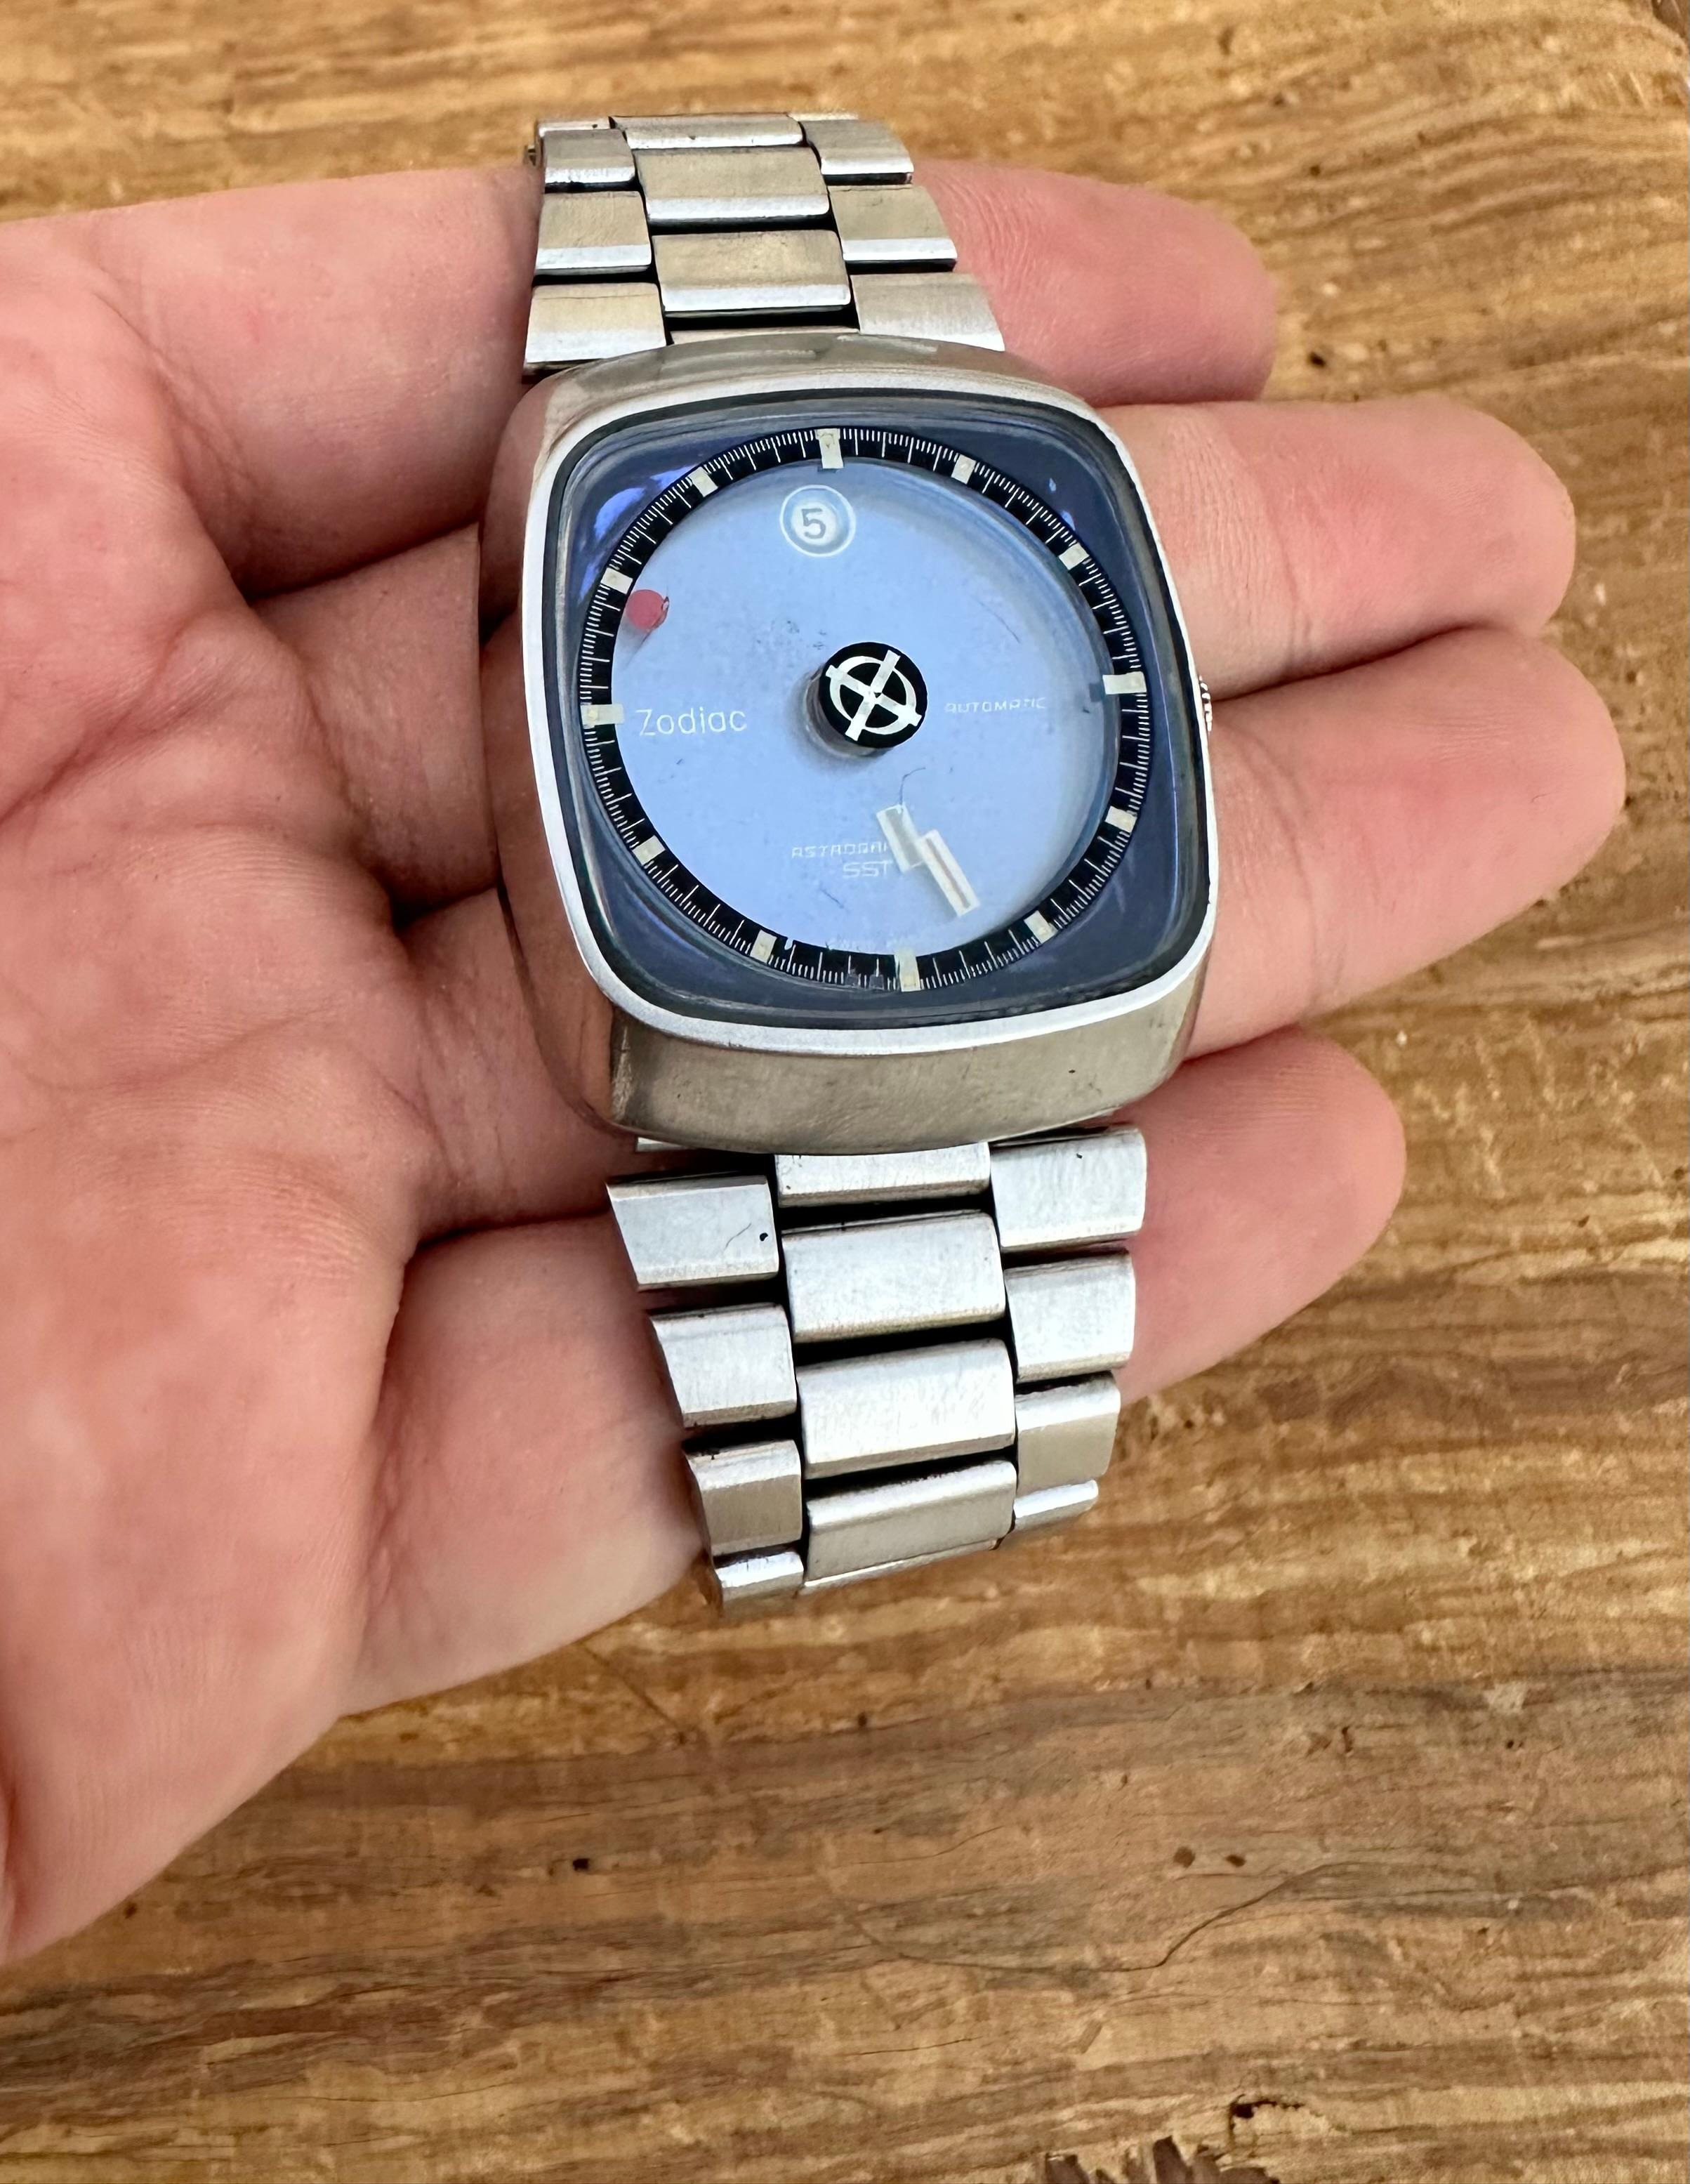 Brand: Zodiac

Model: Astrographic SST

Reference Number: 882-963

Country Of Manufacture: Switzerland

Movement: Automatic

Case Material: Stainless steel

Measurements : 34mm (without crown)

Band Type : Stainless steel

Band Condition : In